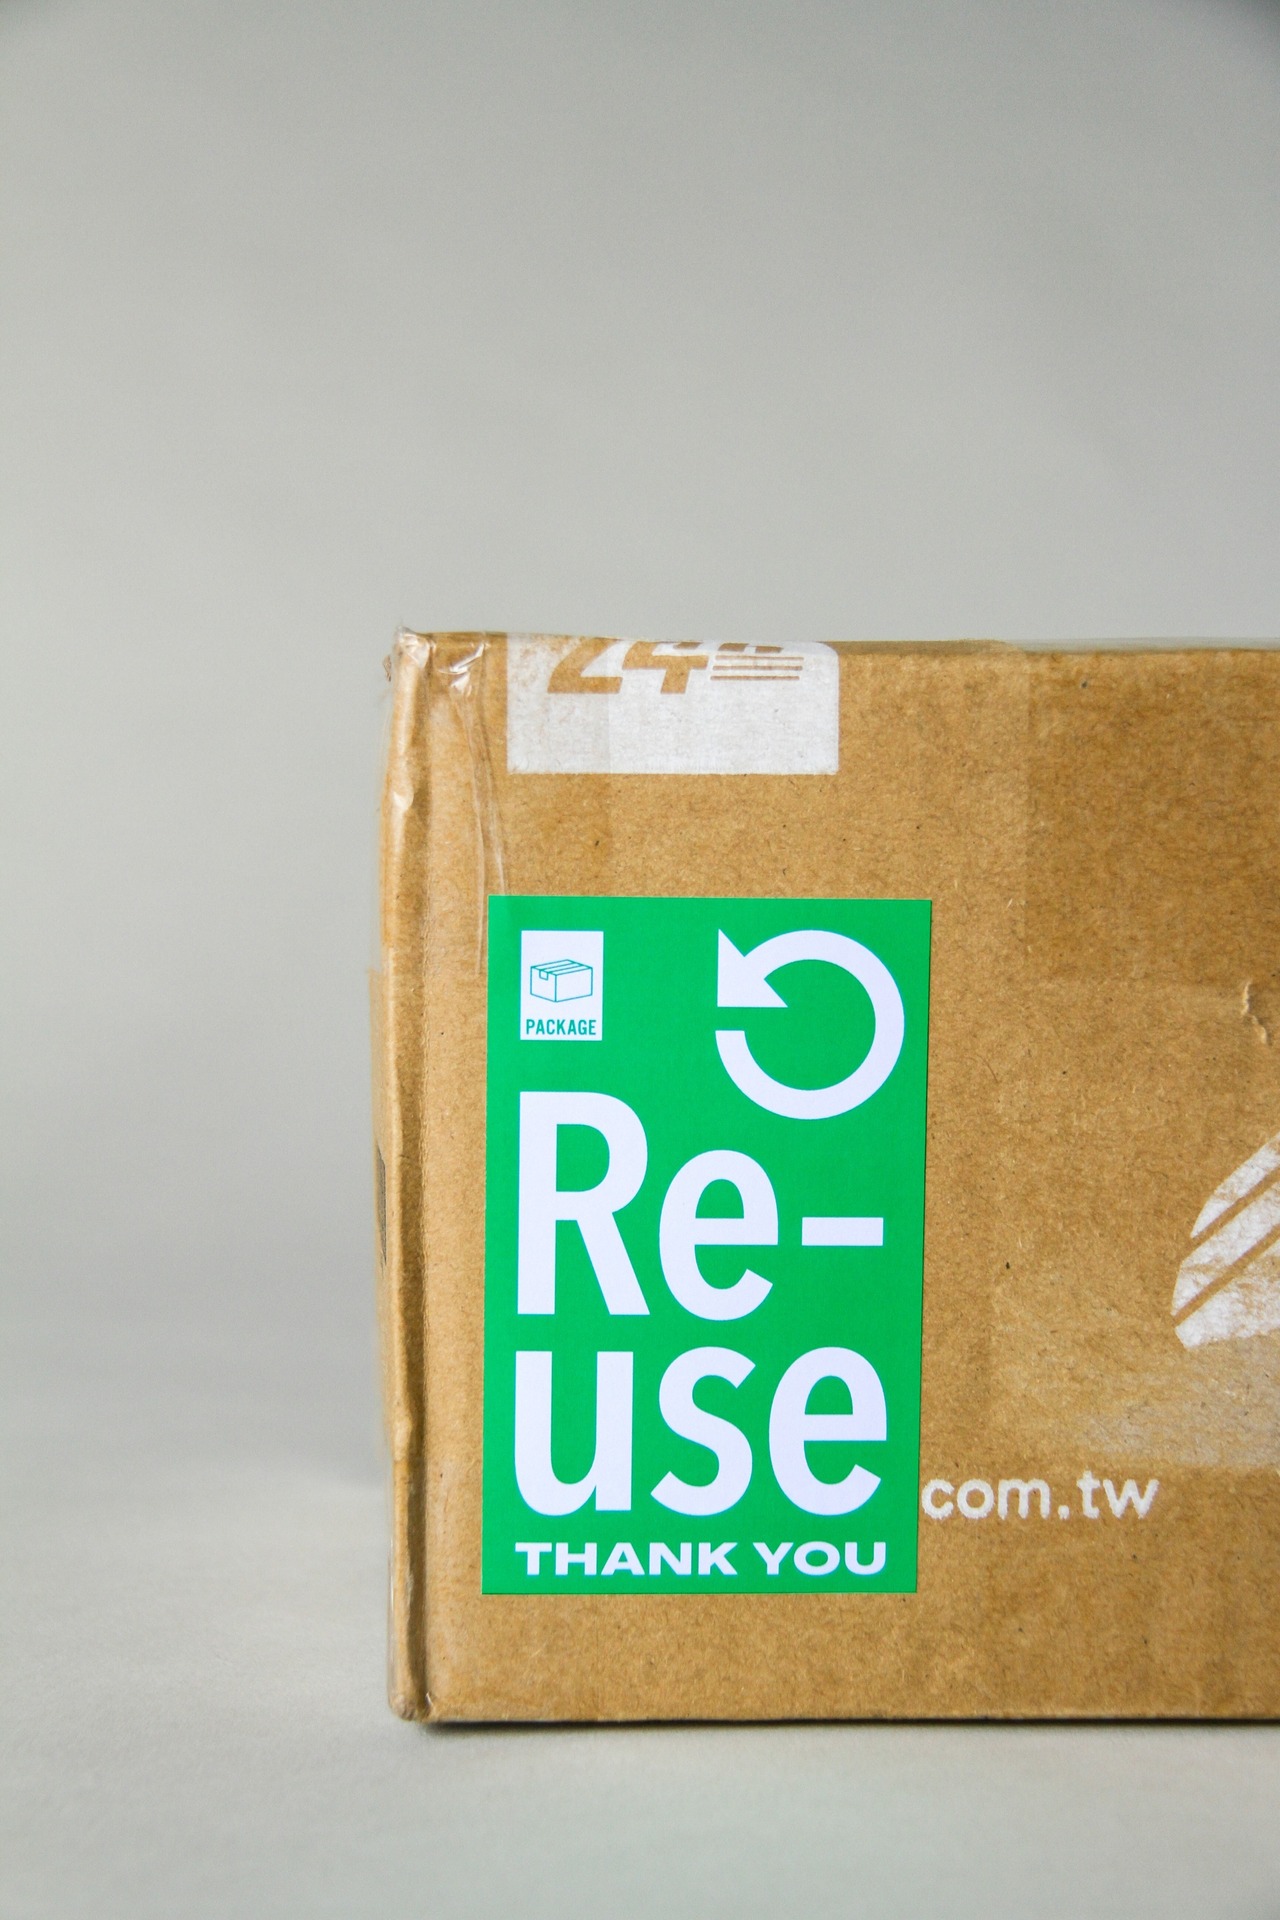 『Re-use Package』シール（５０枚入）